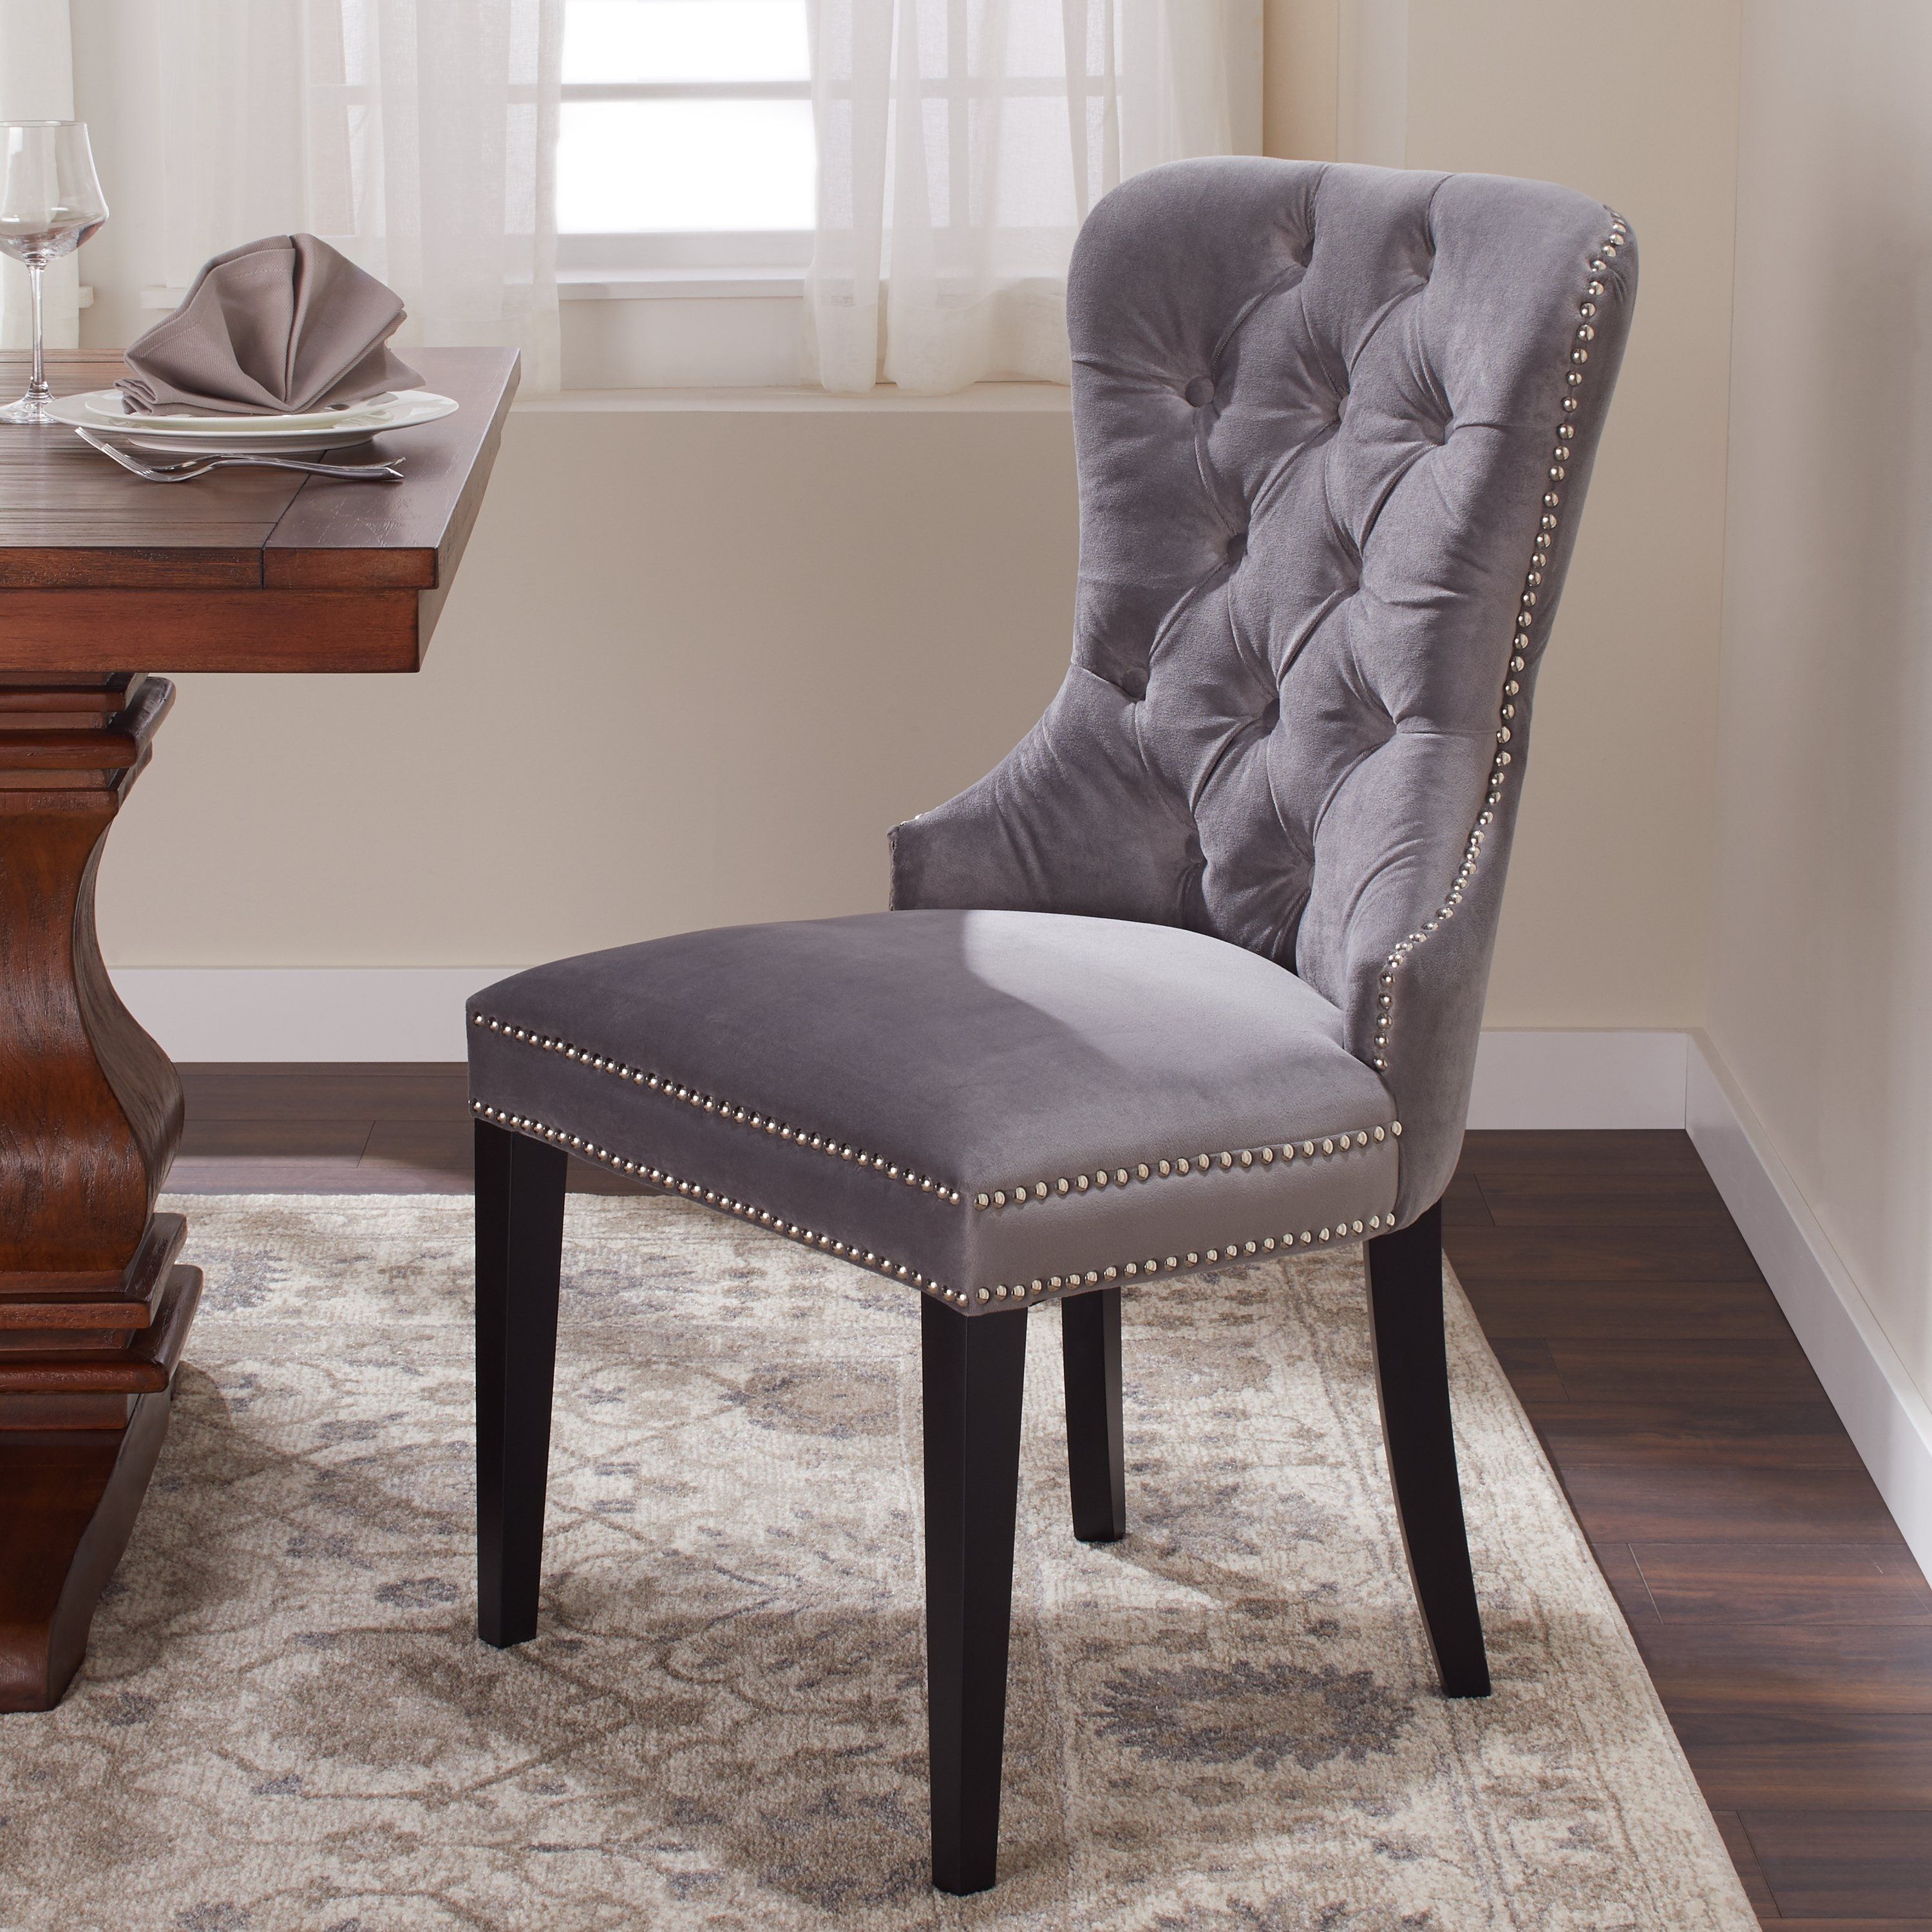 Most Current Shop Abbyson Versailles Grey Tufted Dining Chair – On Sale – Free Within Grey Dining Chairs (Photo 6 of 20)